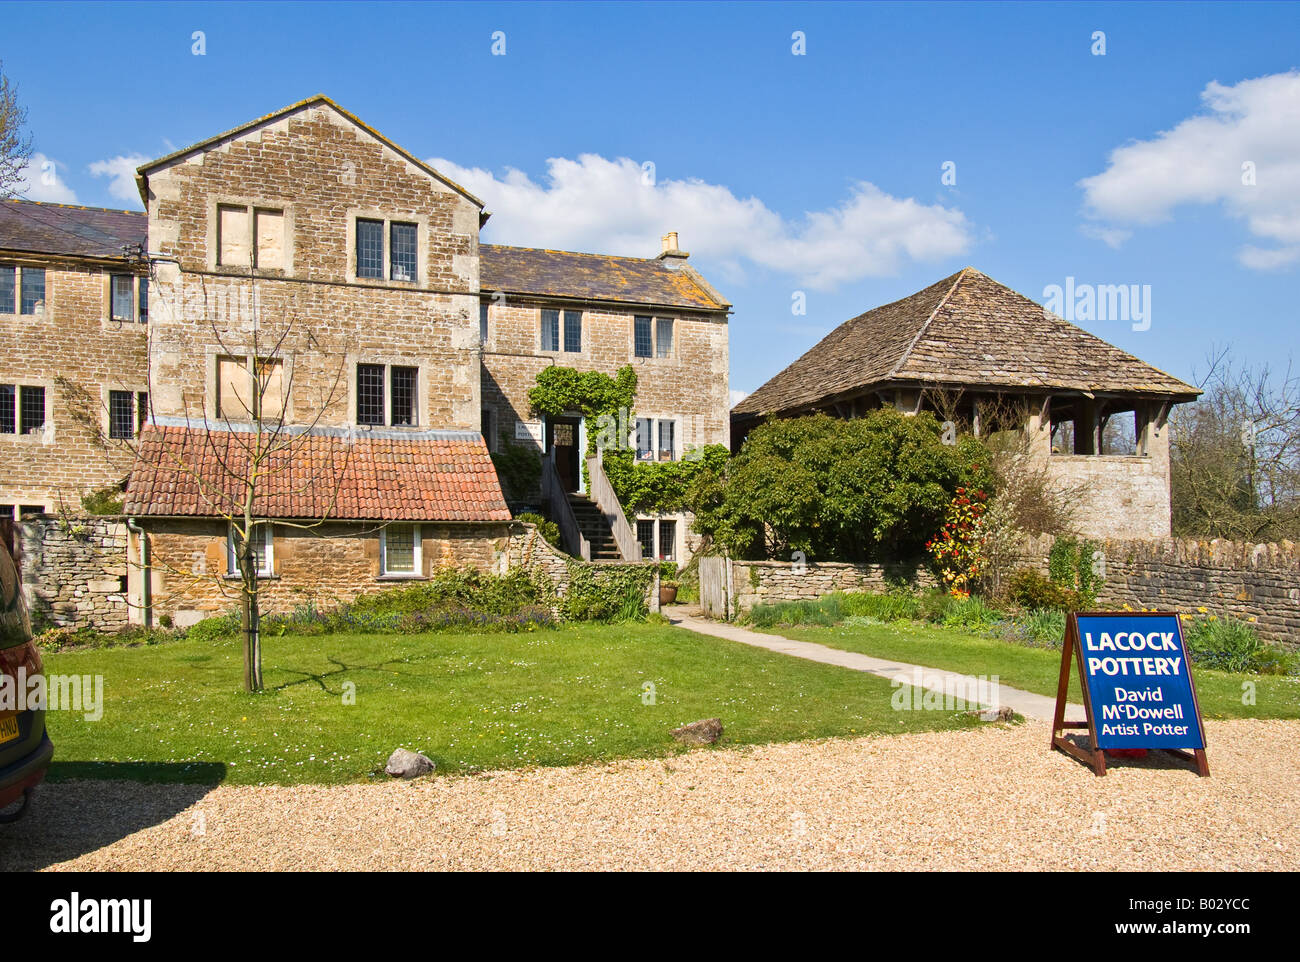 Lacock Pottery in Lacock Wiltshire England UK EU viewed from public highway Stock Photo